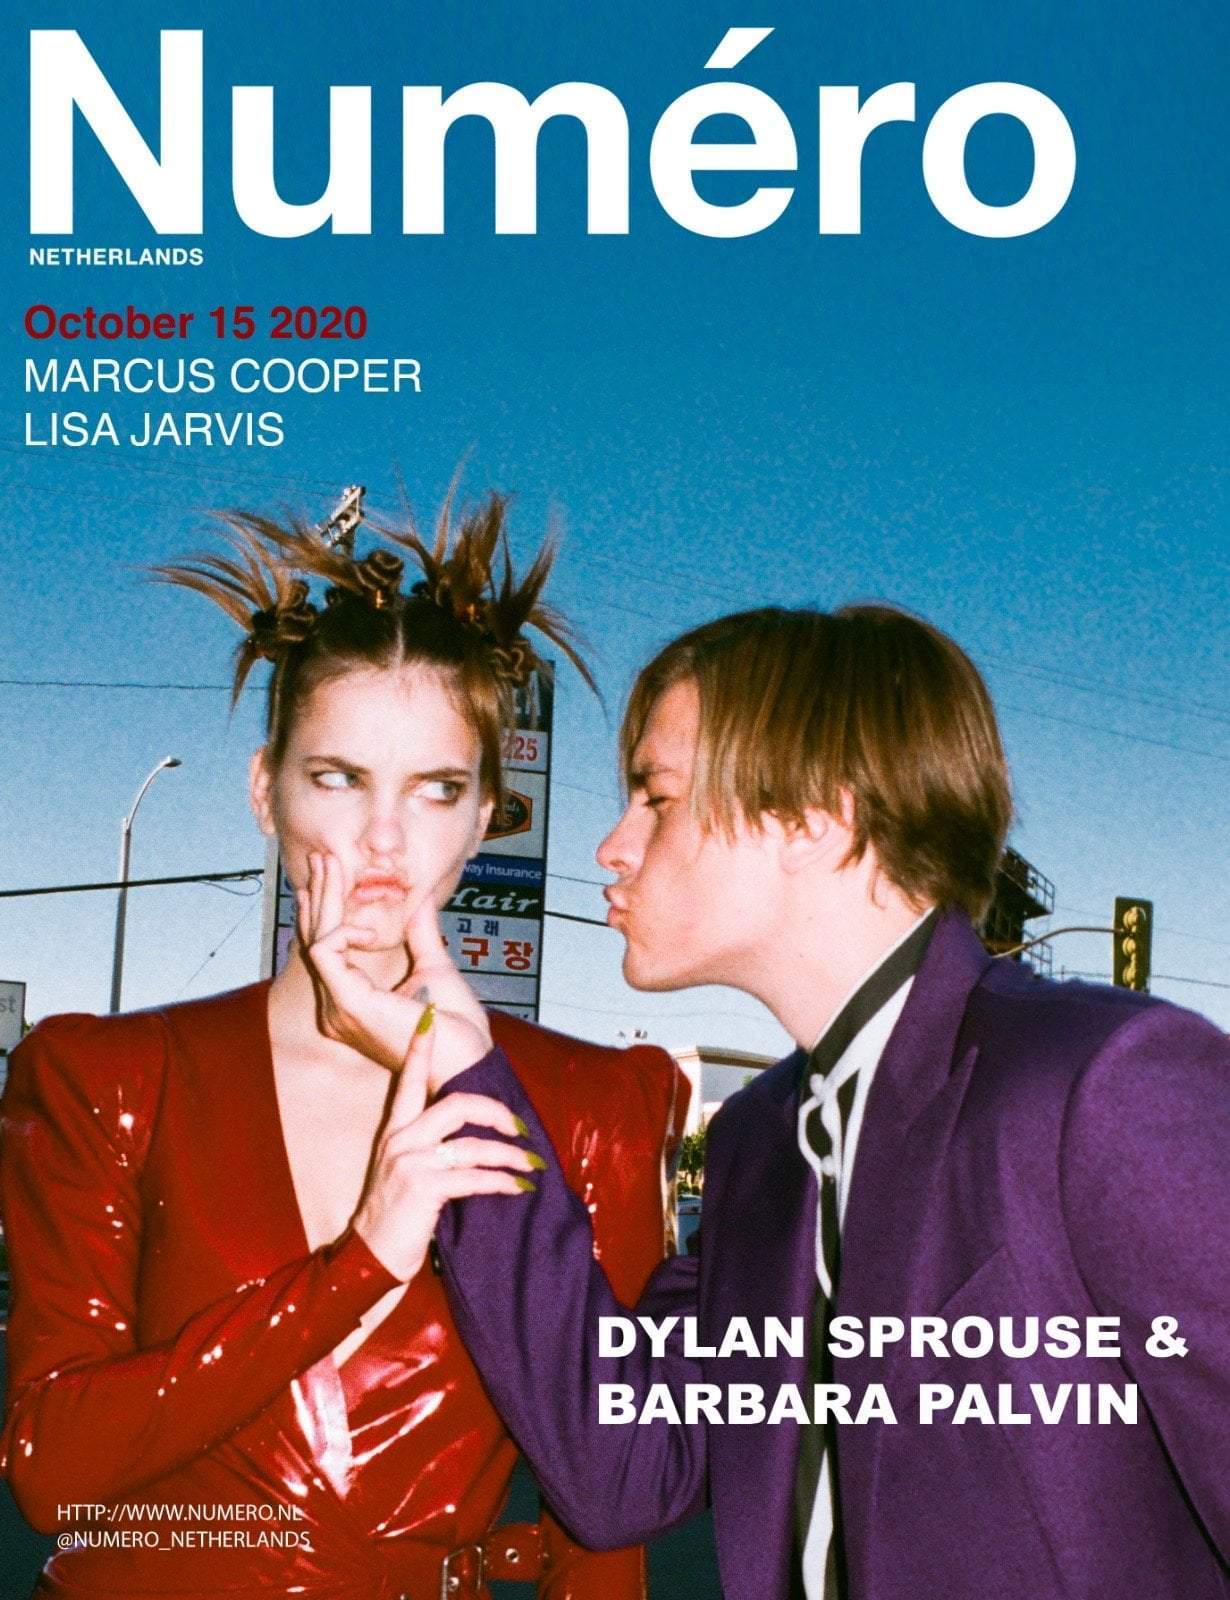 Fotos n°23 : Barbara Palvin y Dylan Sprouse Hit the Cover!